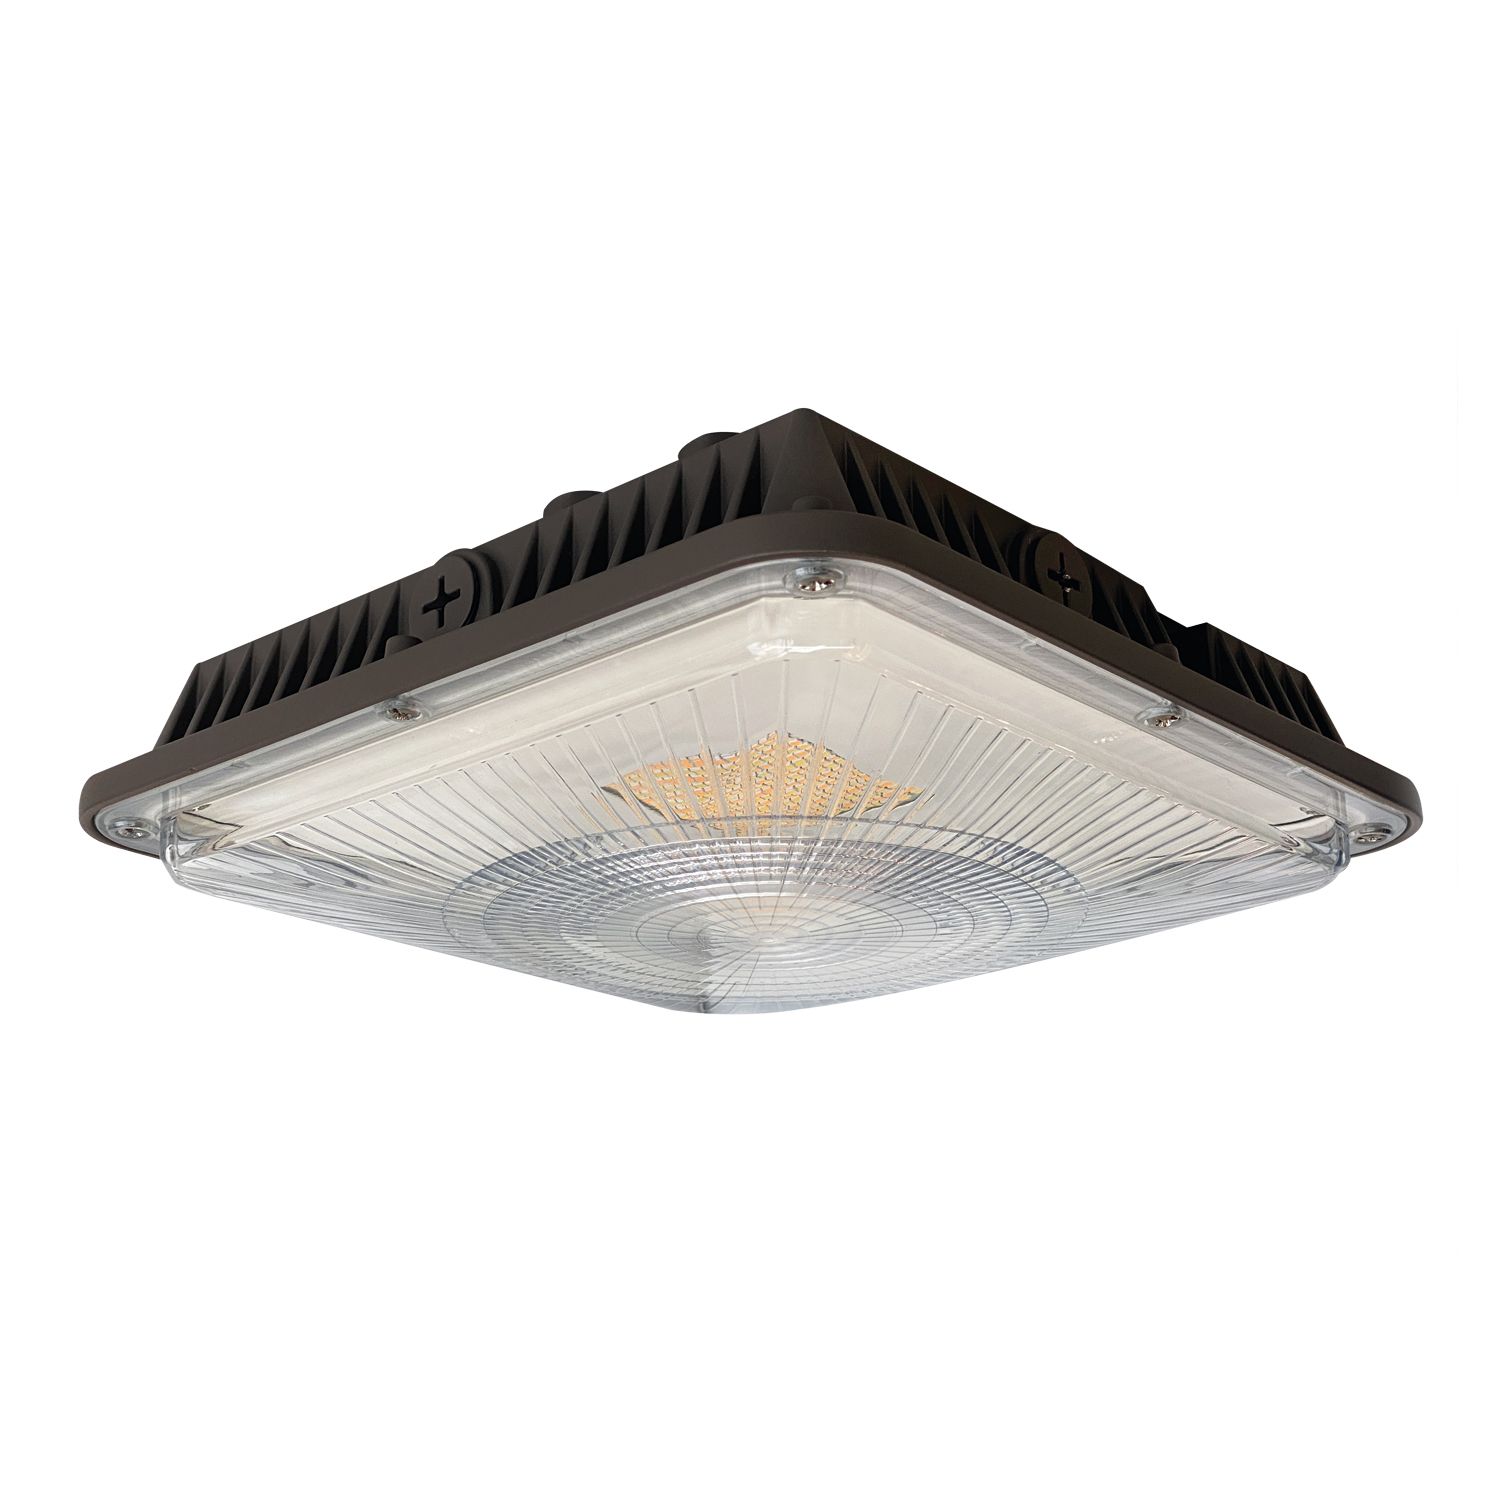 Details about   DISCOUNTED COOPER PART # CLCSLED-117-SM-UNV EATON 117 WATTS LED CANOPY LIGHT 